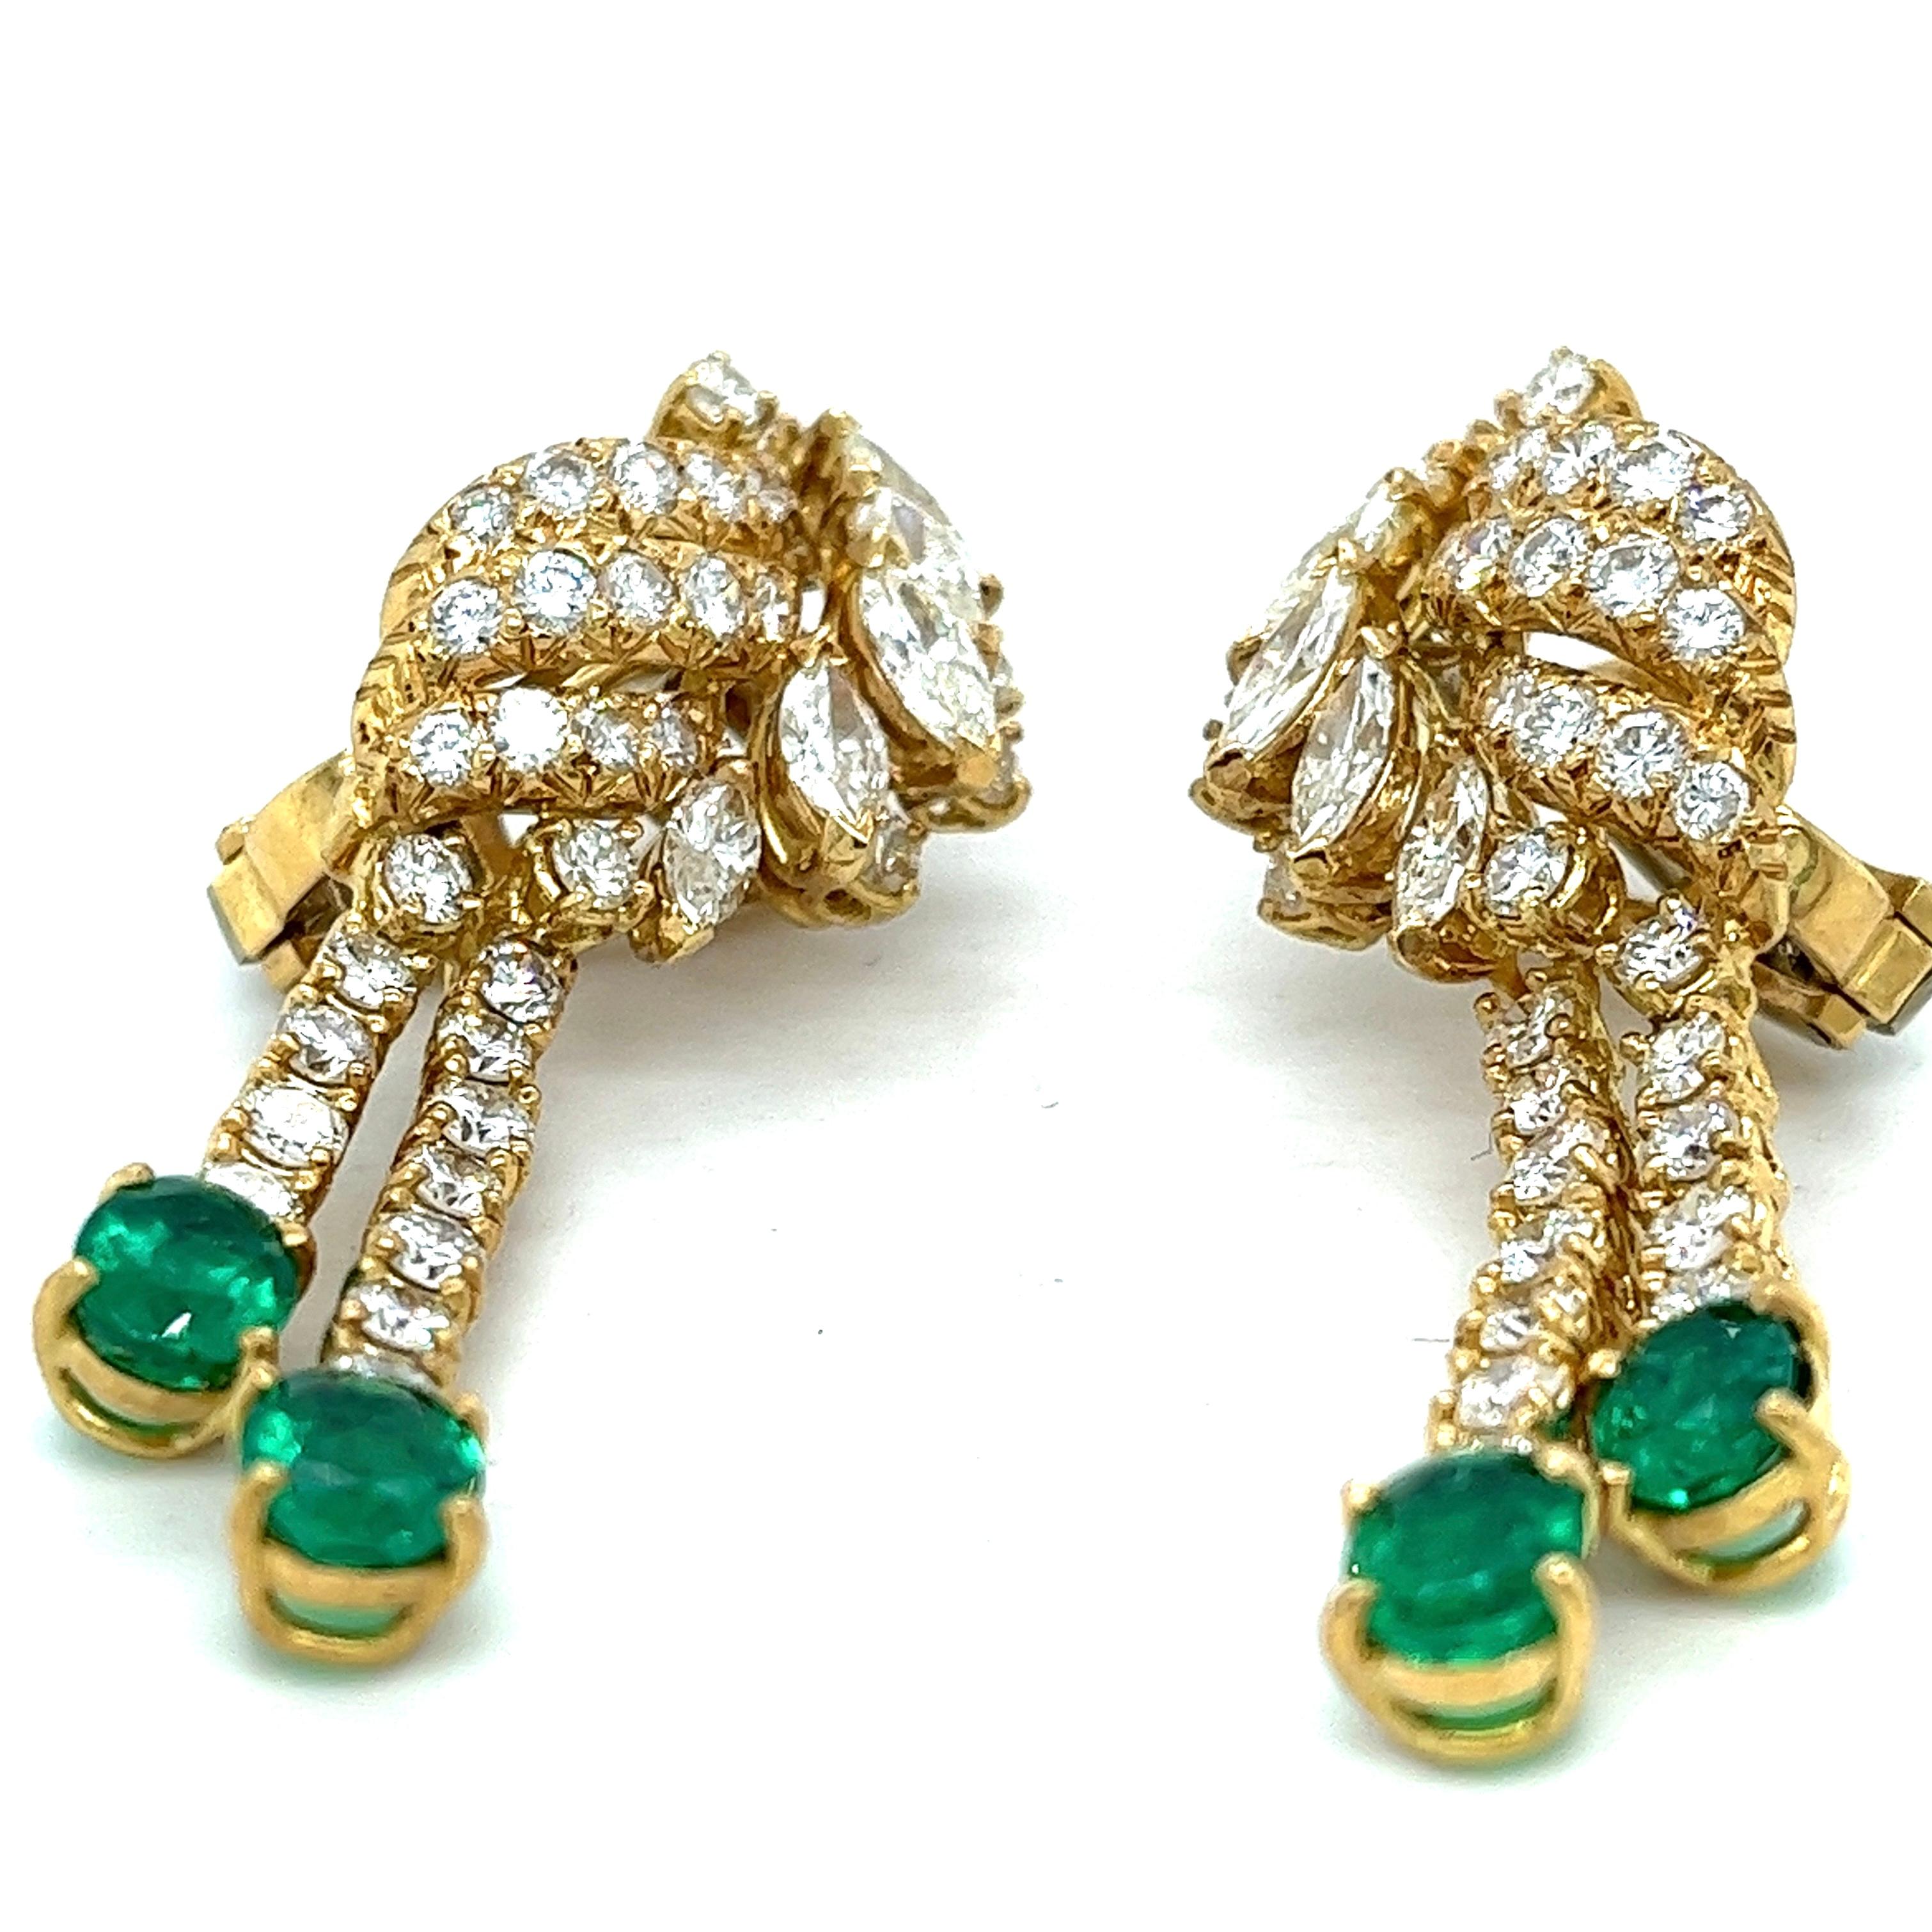 Heirloom 9.75 Carats Diamond Emerald Waterfall Earring, 18kt Italy, 1970's For Sale 4